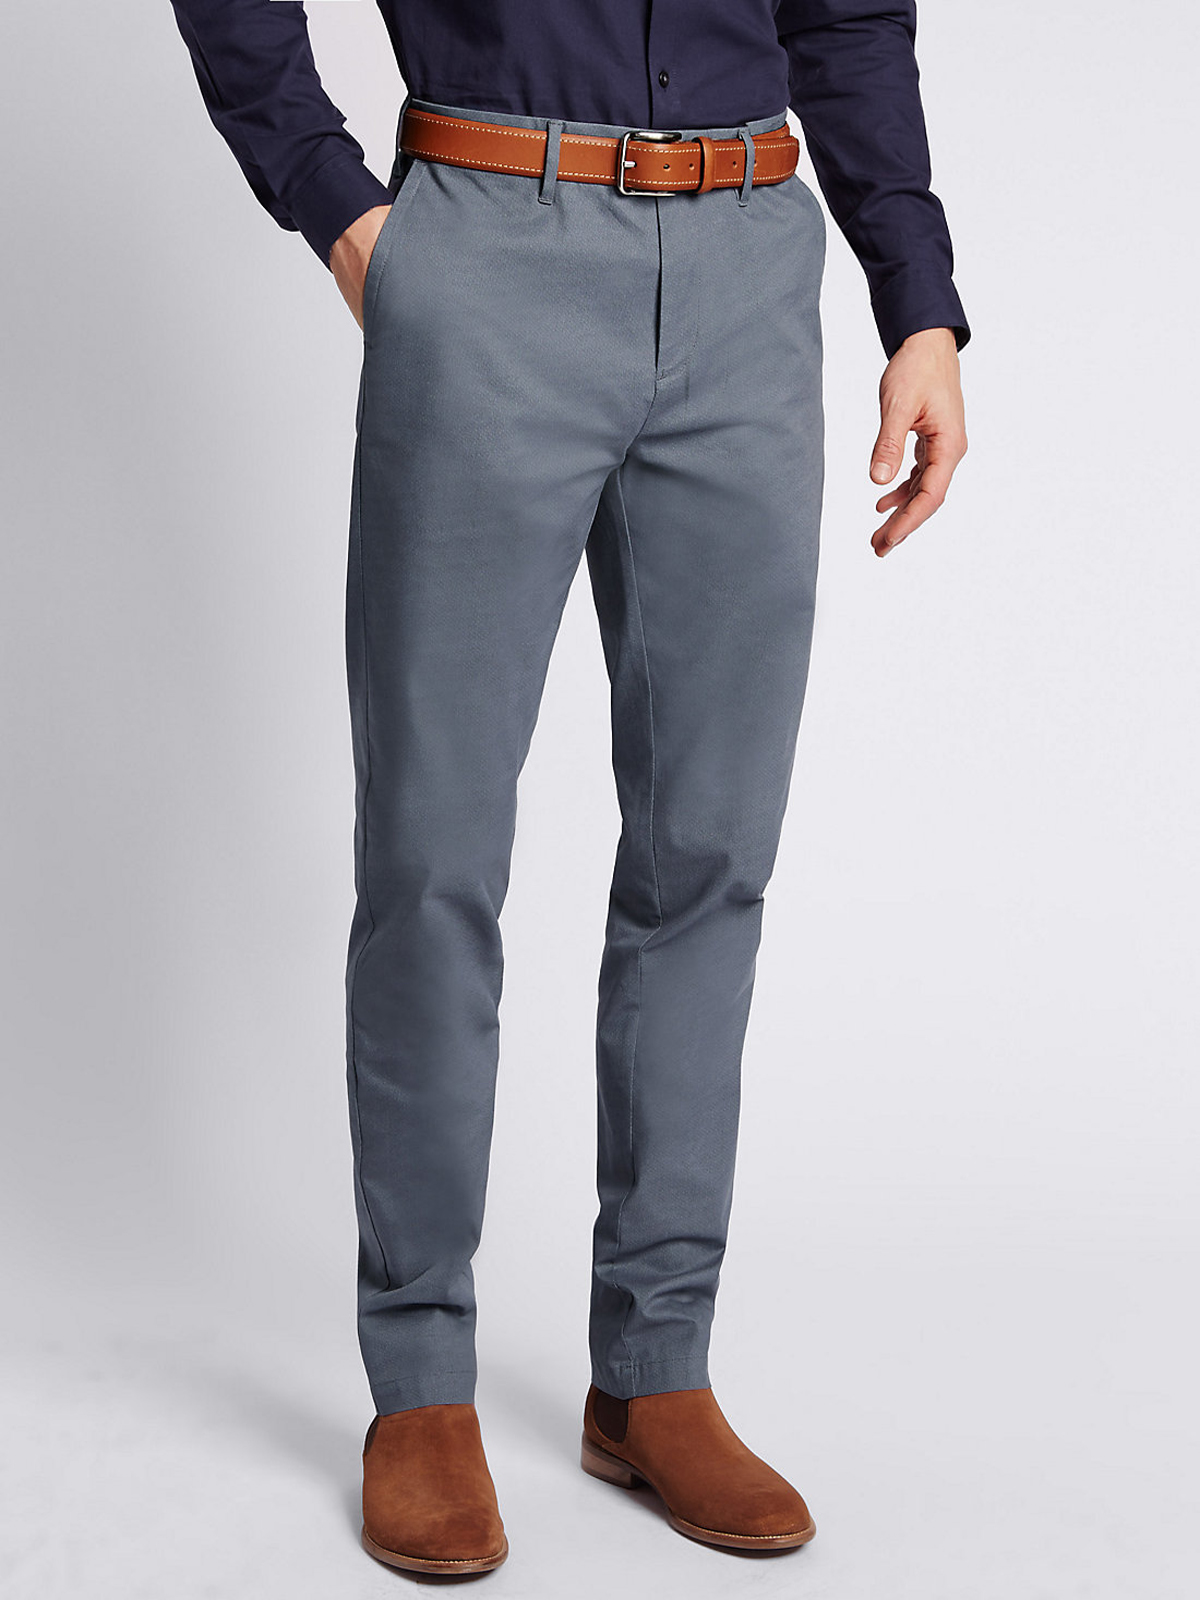 Marks and Spencer - - M&5 GREY Slim Fit Pure Cotton Chinos - Waist Size ...